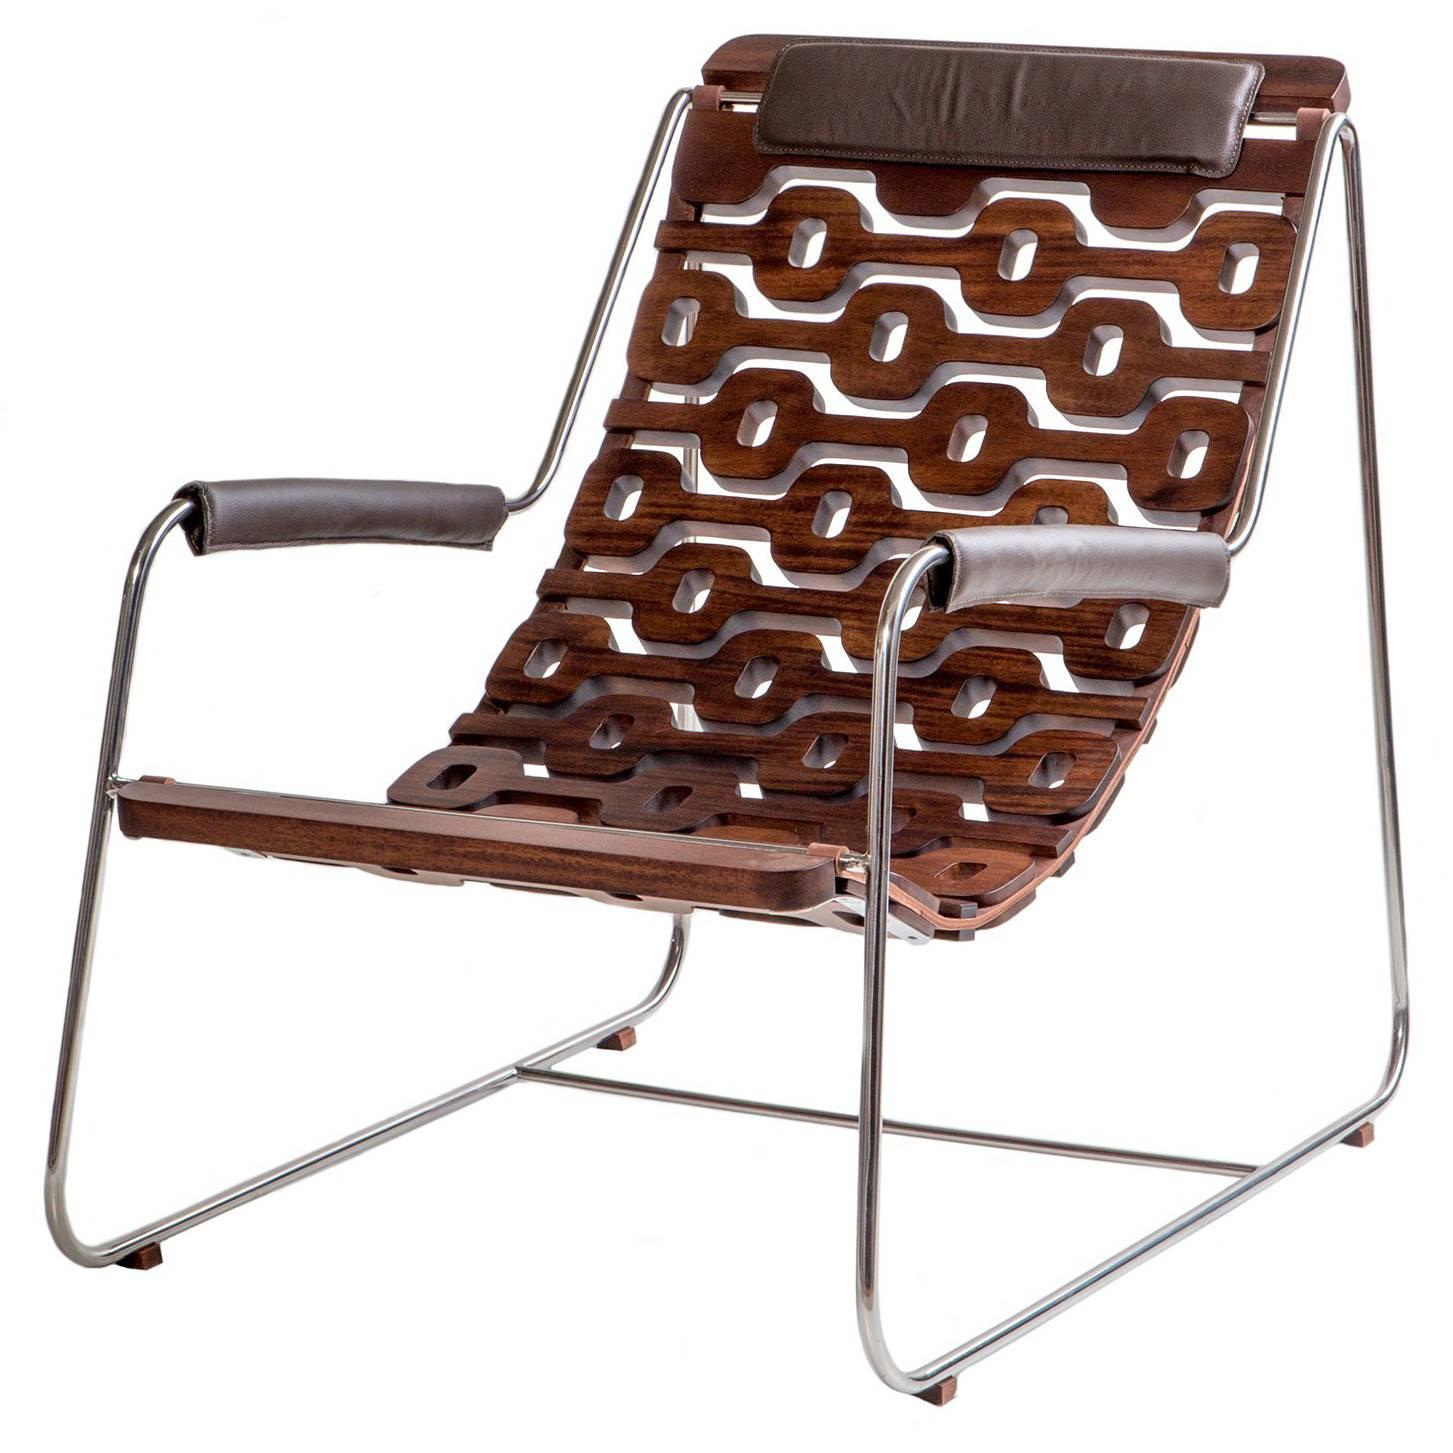 Ipanema Brazilian Contemporary Wood, Metal and Leather Armchair by Lattoog